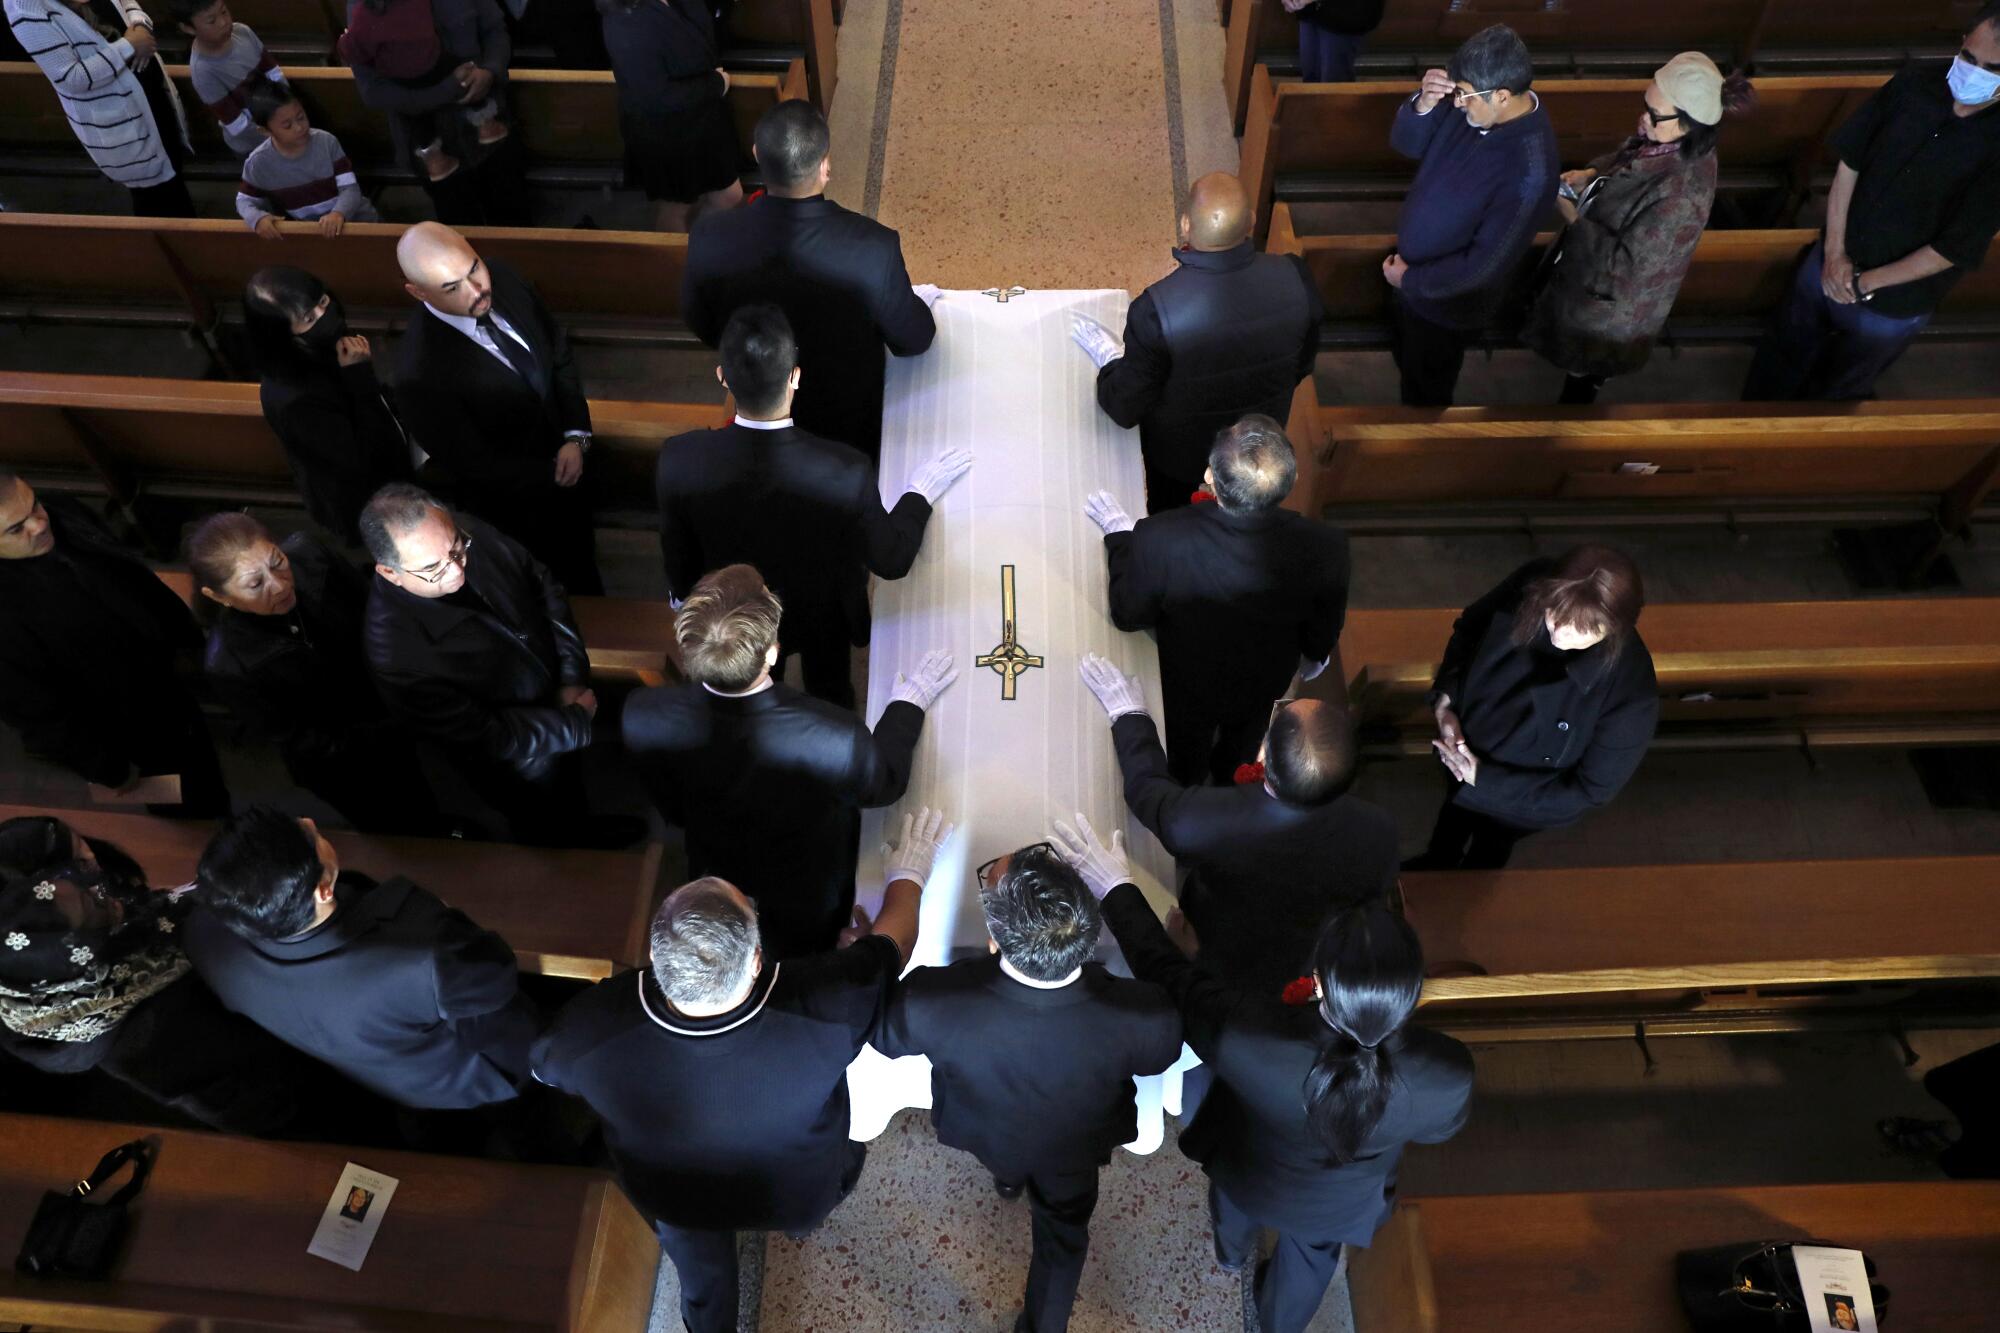 Pallbearers bring a casket into a church in a view from above and behind 